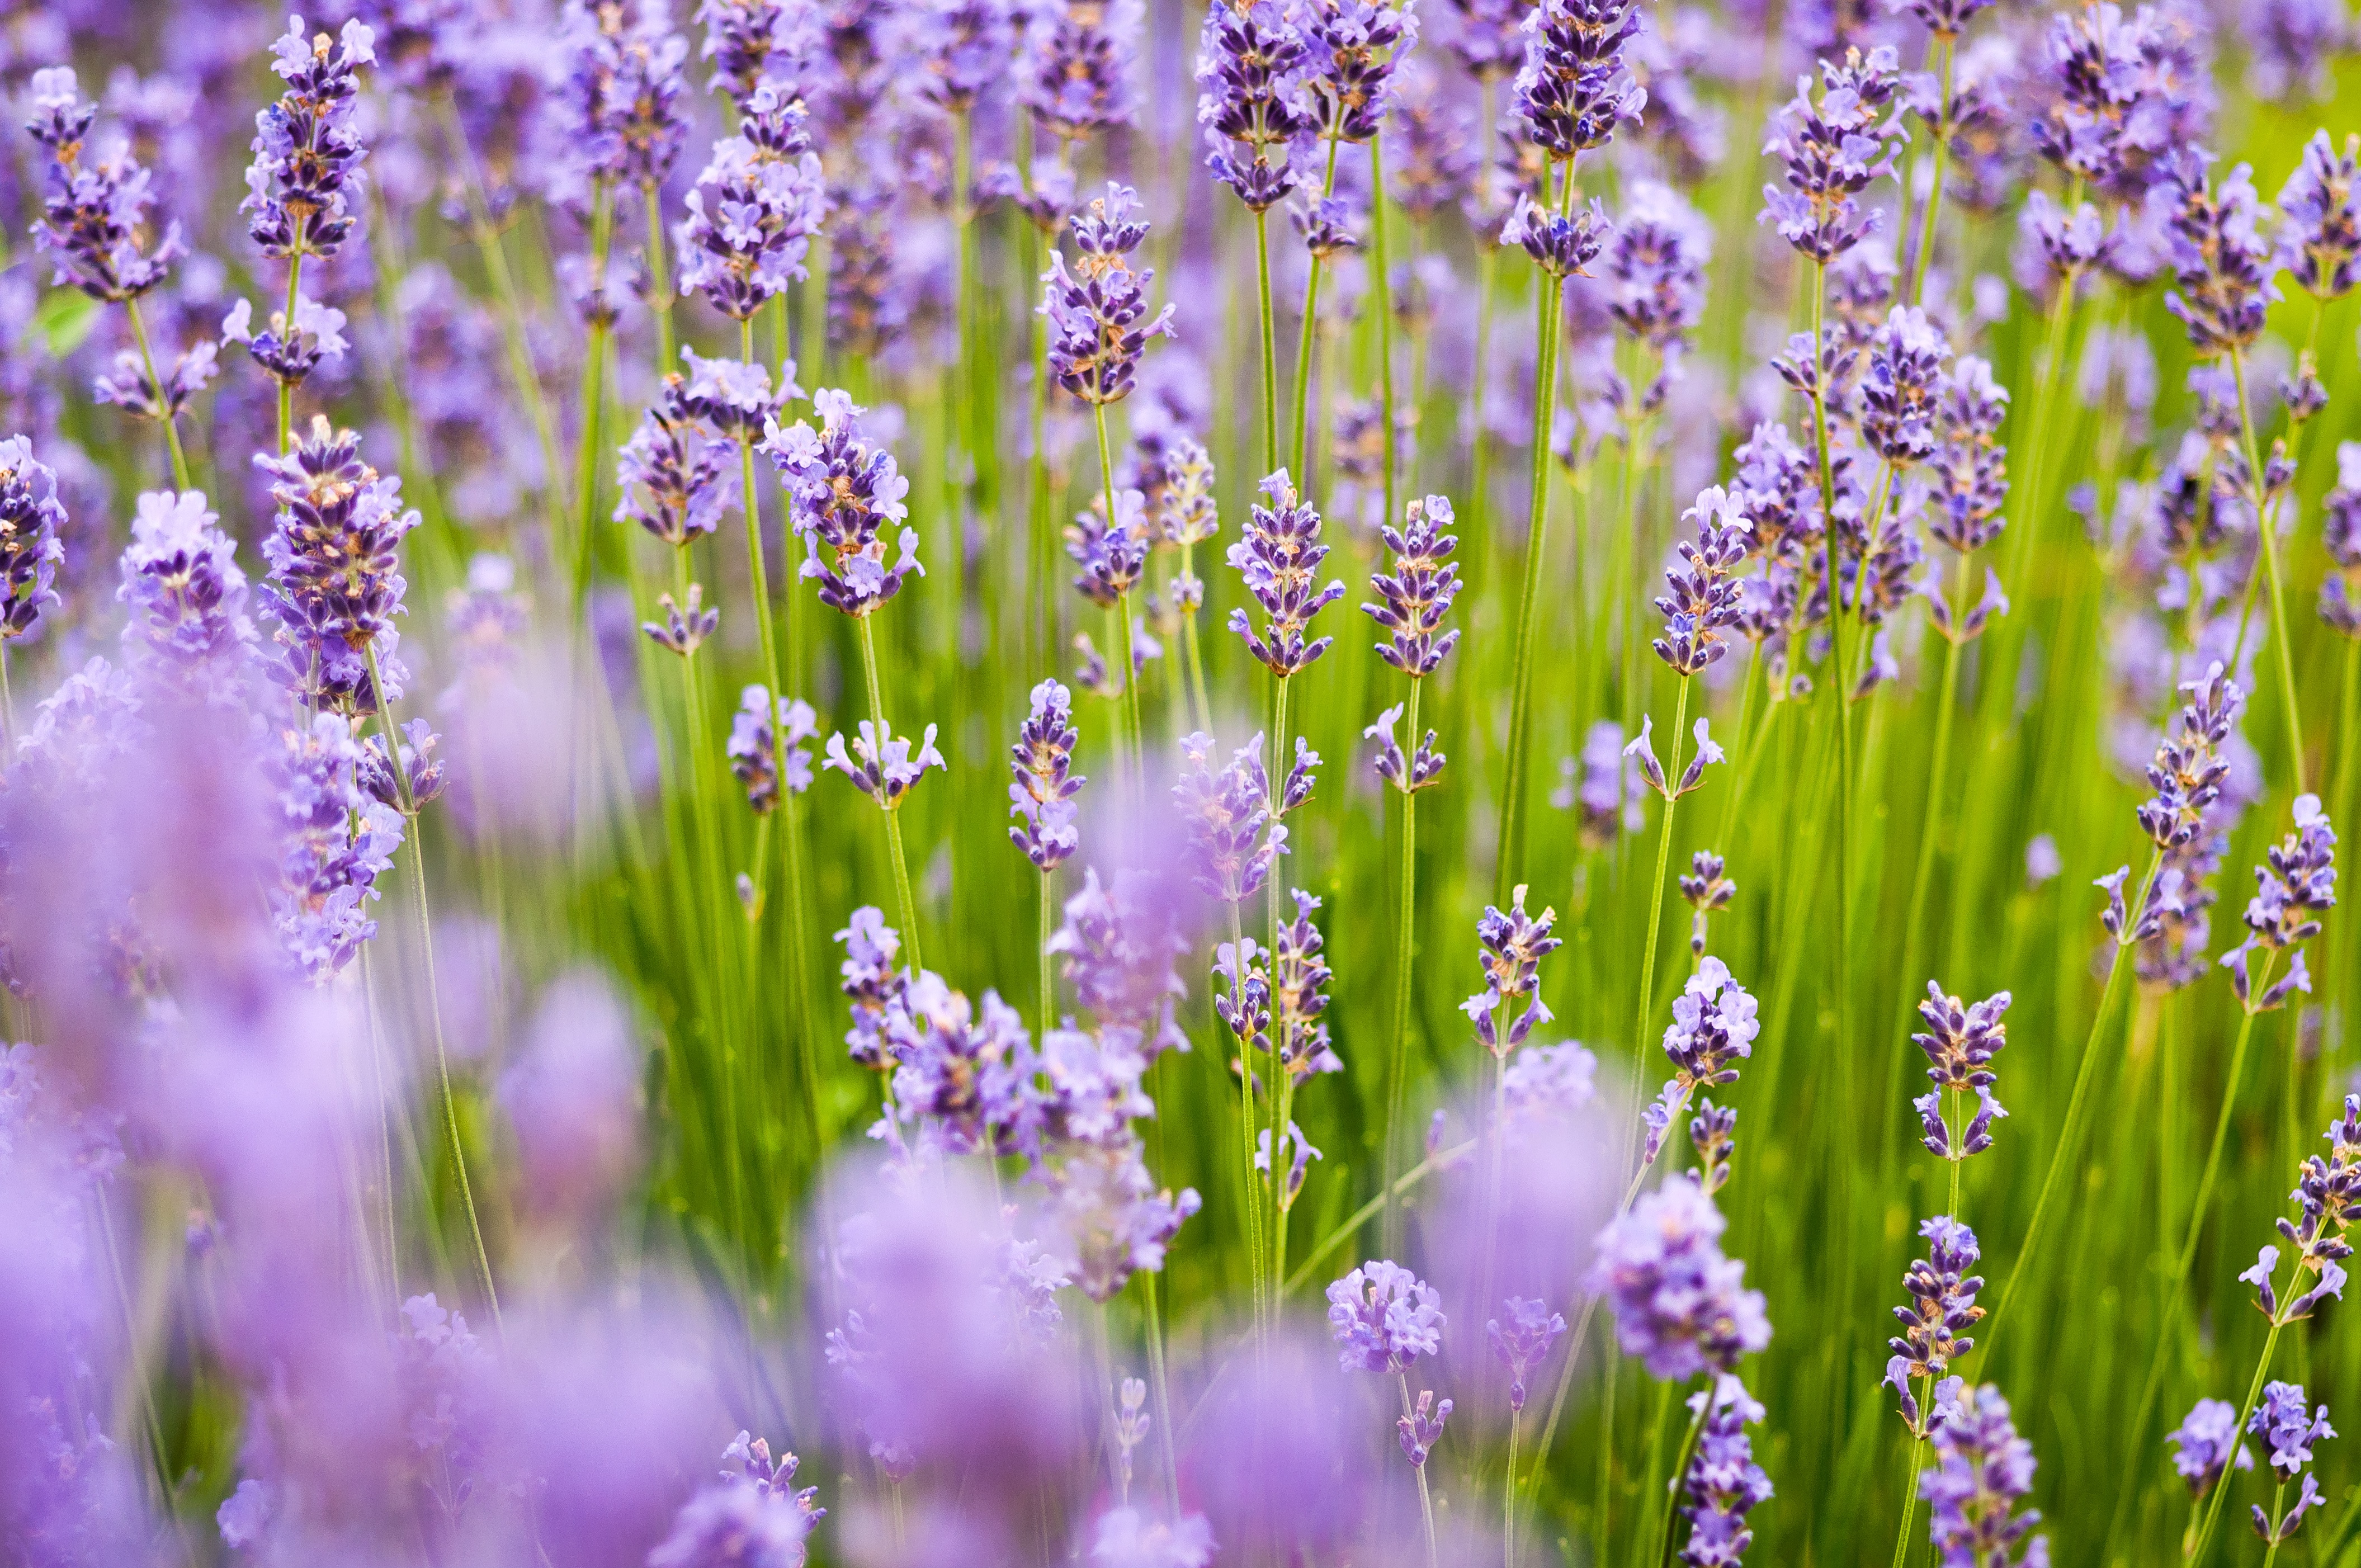 A large field with French lavender